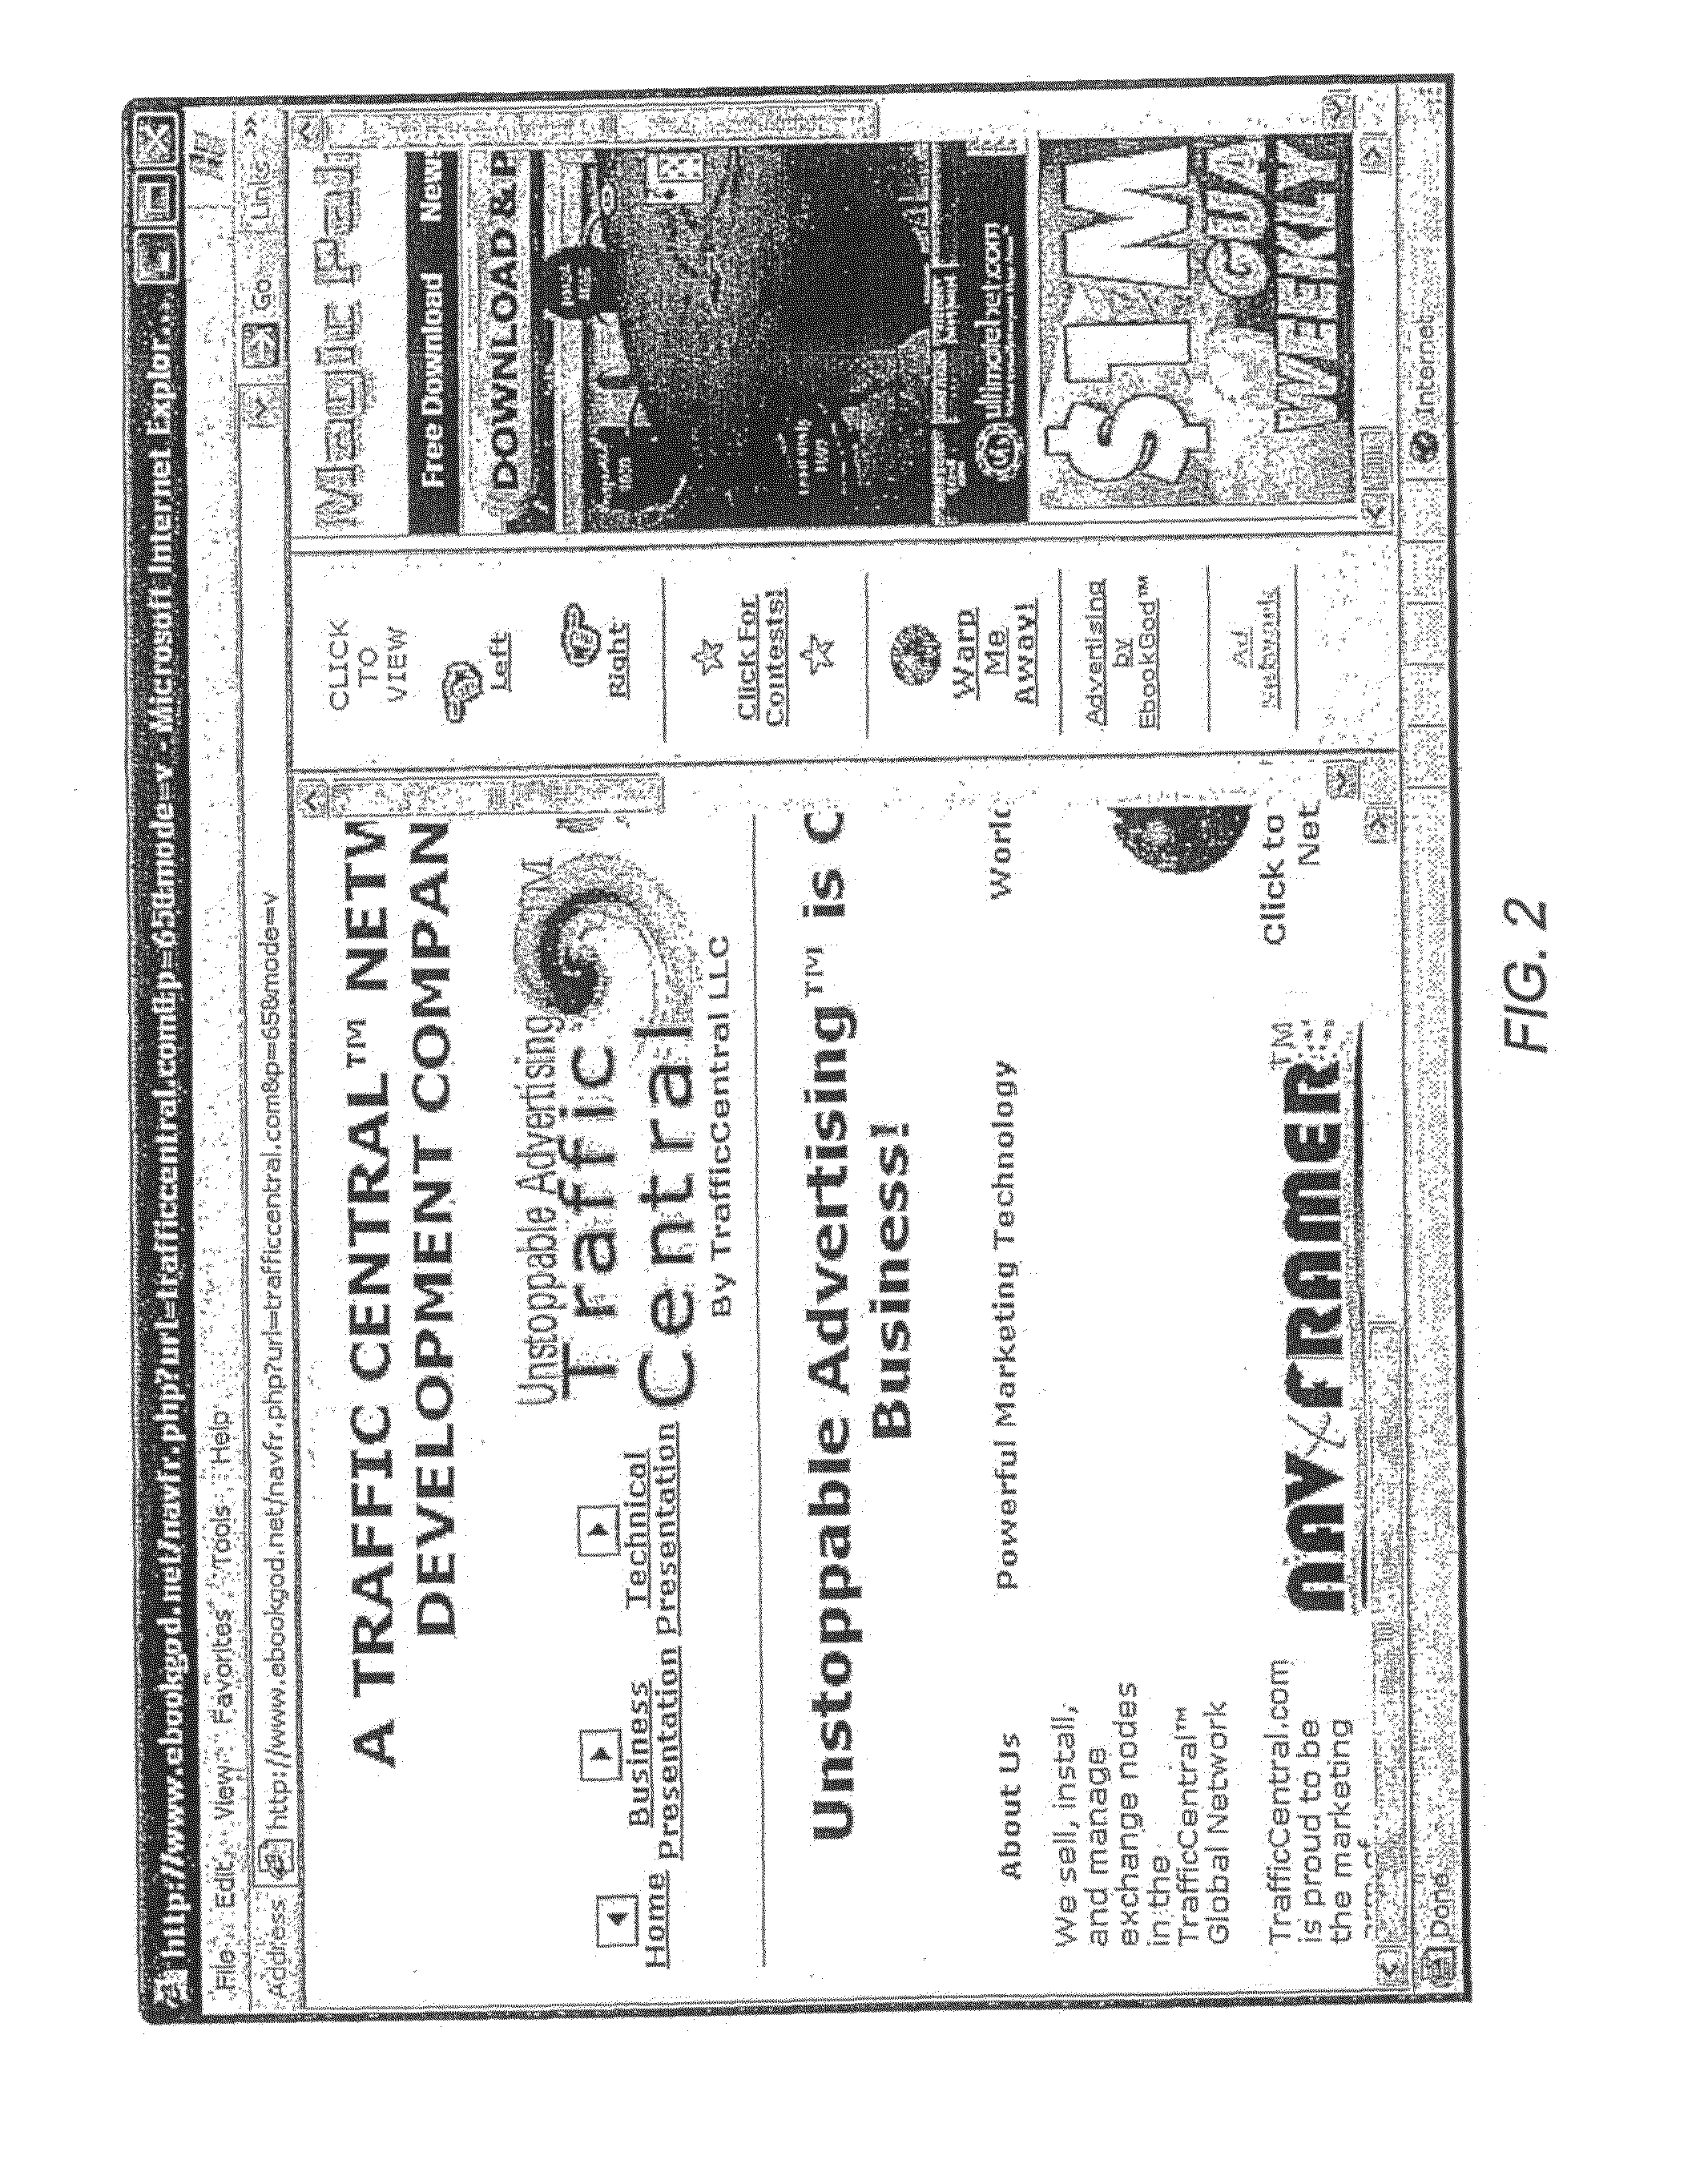 Distributed content exchange and presentation system